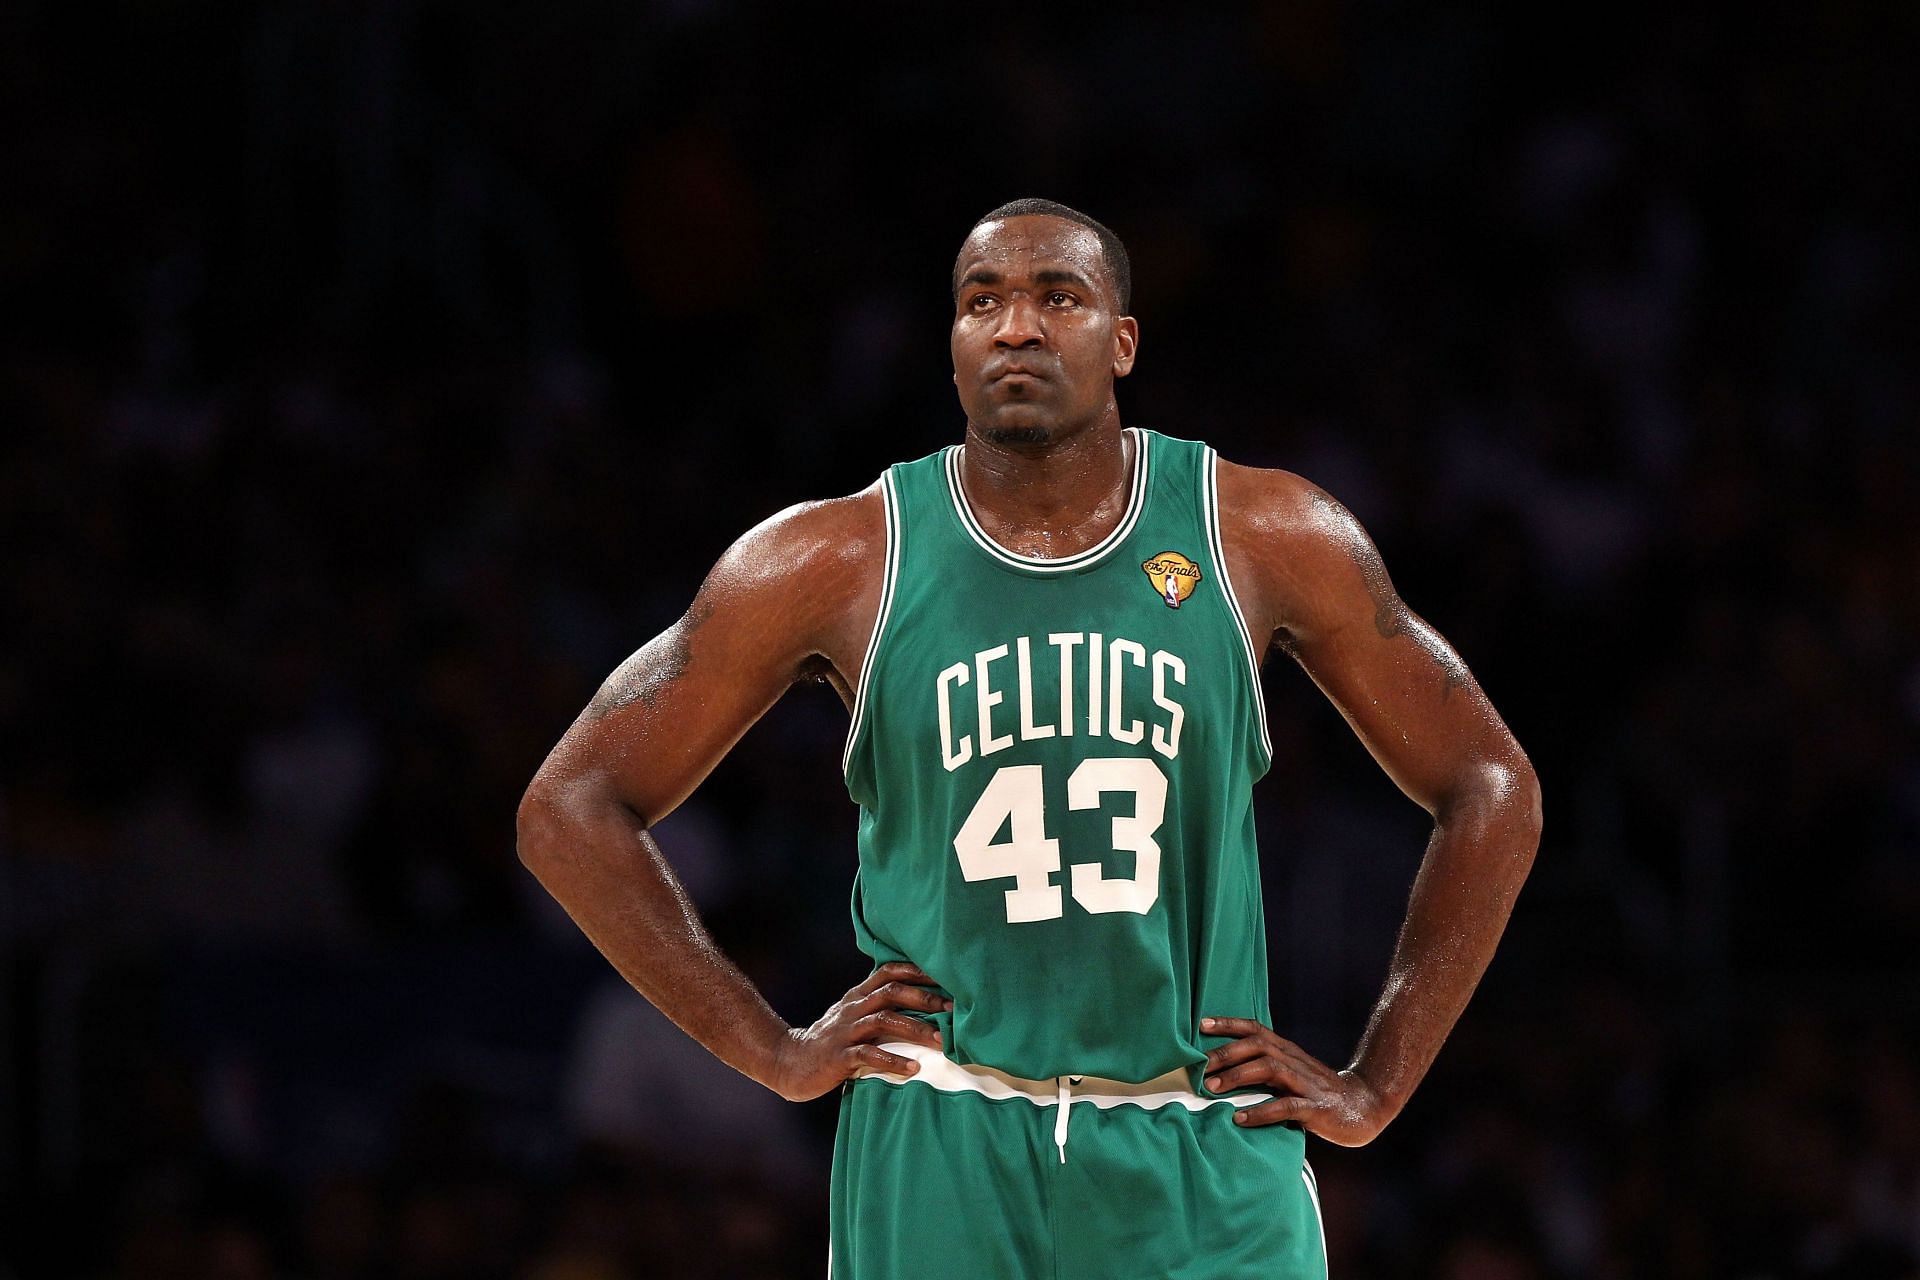 Kendrick Perkins during his time with the Boston Celtics